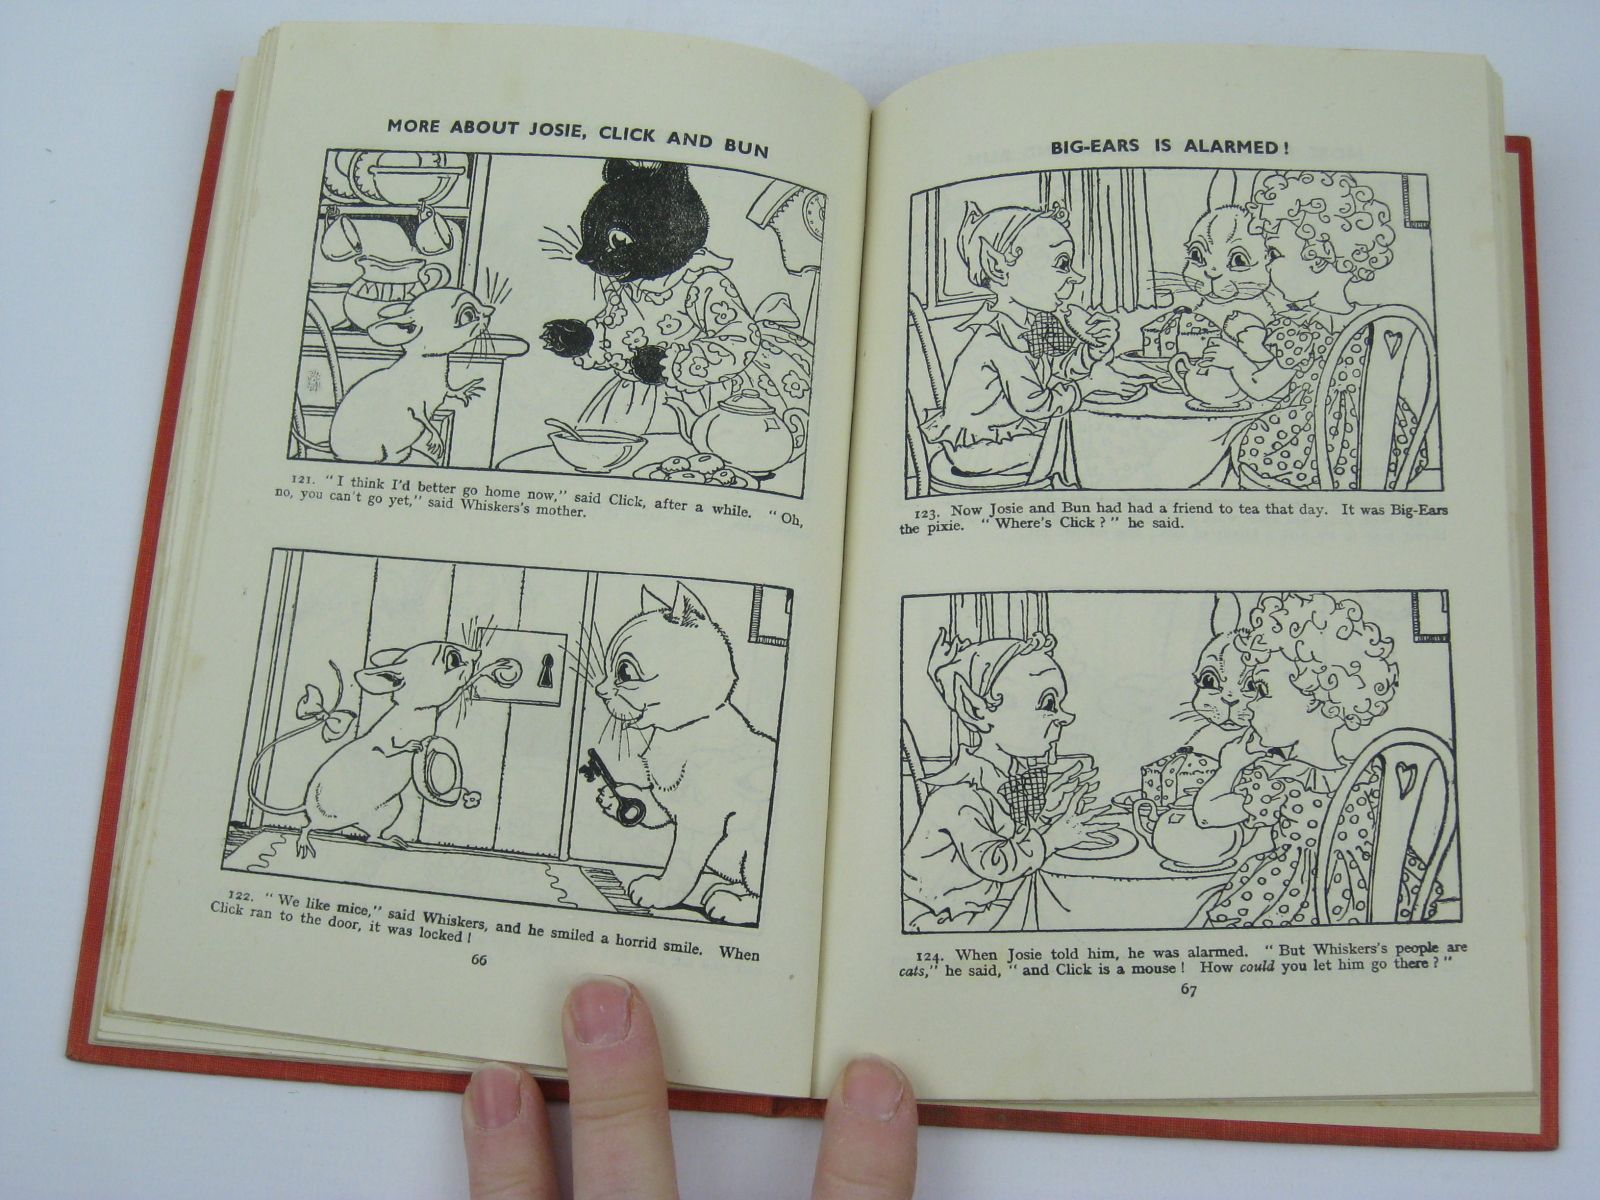 Photo of MORE ABOUT JOSIE, CLICK AND BUN written by Blyton, Enid illustrated by Wheeler, Dorothy M. published by George Newnes Ltd. (STOCK CODE: 1406147)  for sale by Stella & Rose's Books